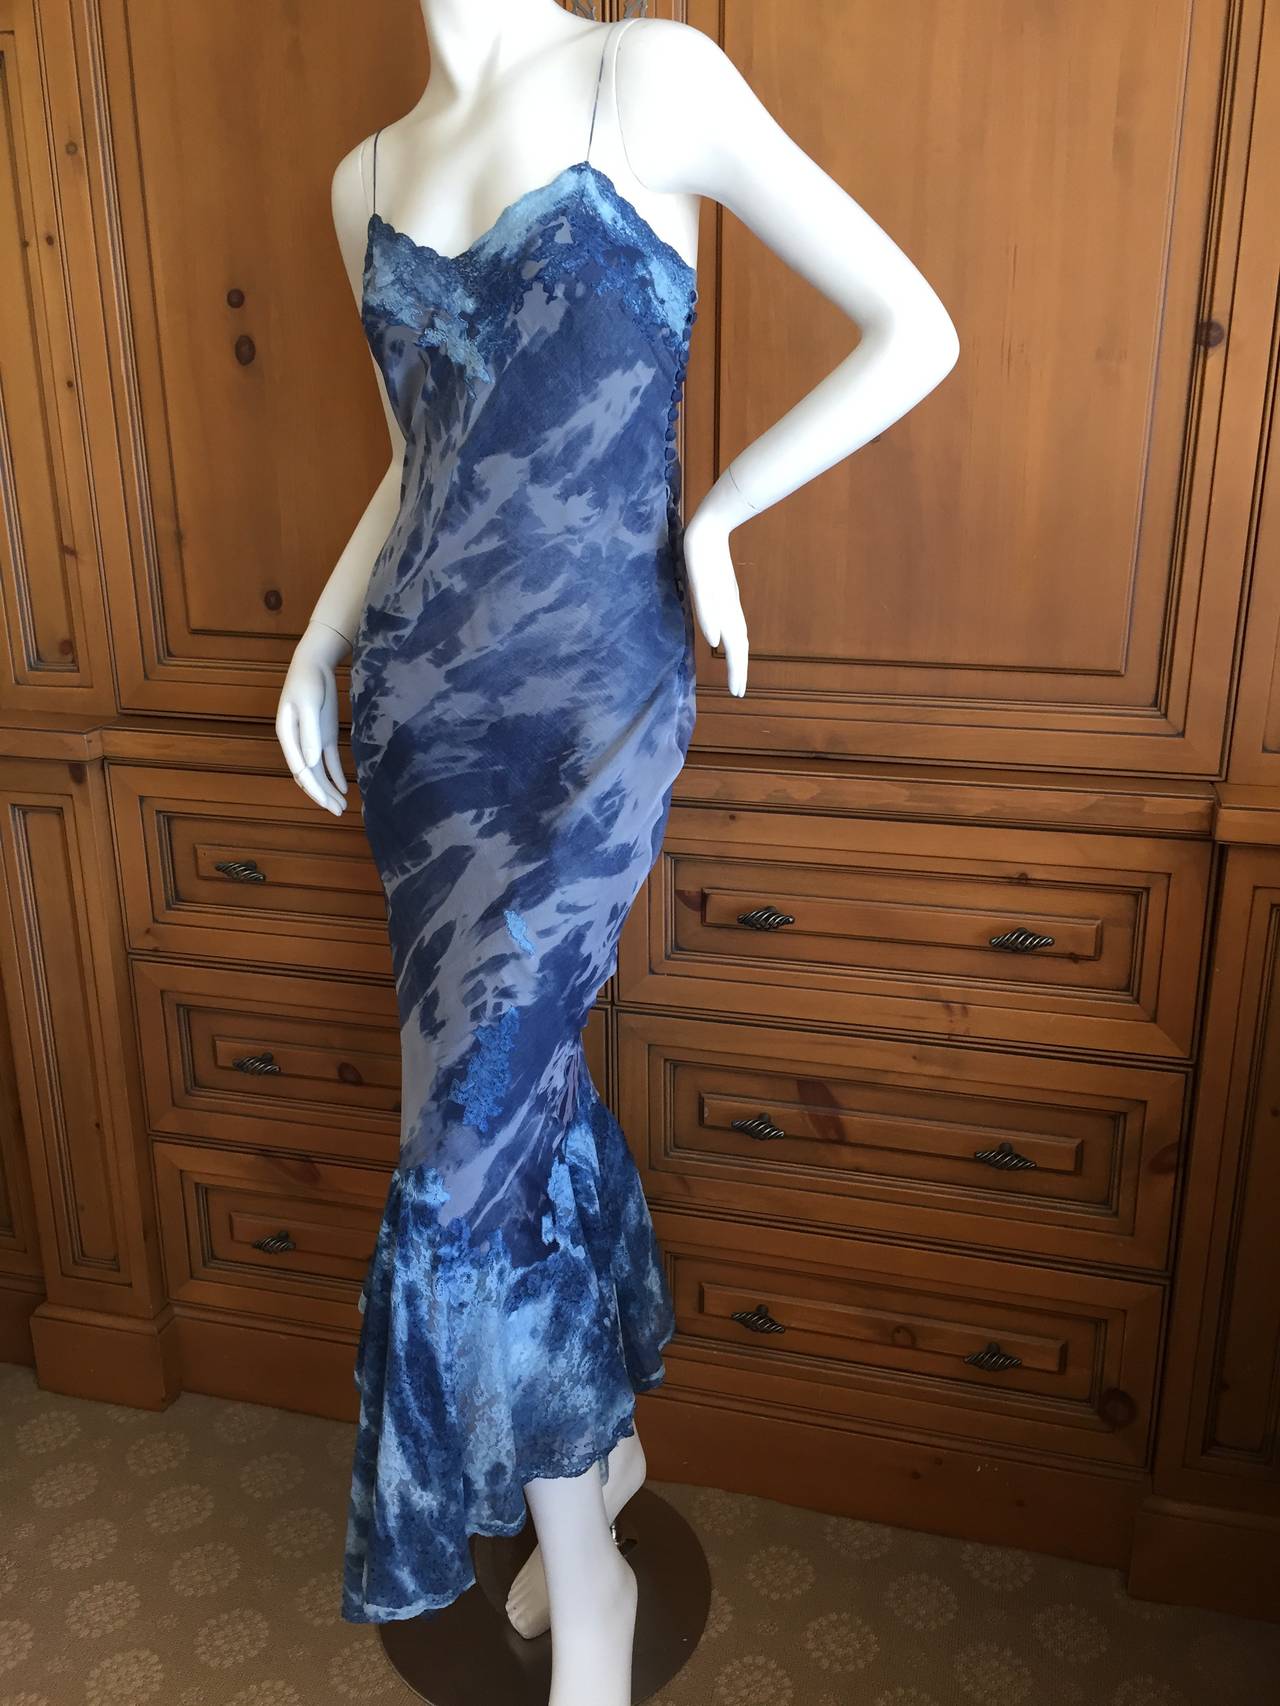 Elegant tie dye pattern silk bias cut dress from Galliano for Dior in rich shades of blue.
Subtle  tie dye cotton lace inserts throughout, this dress is much prettier than the photos show.
Side buttons